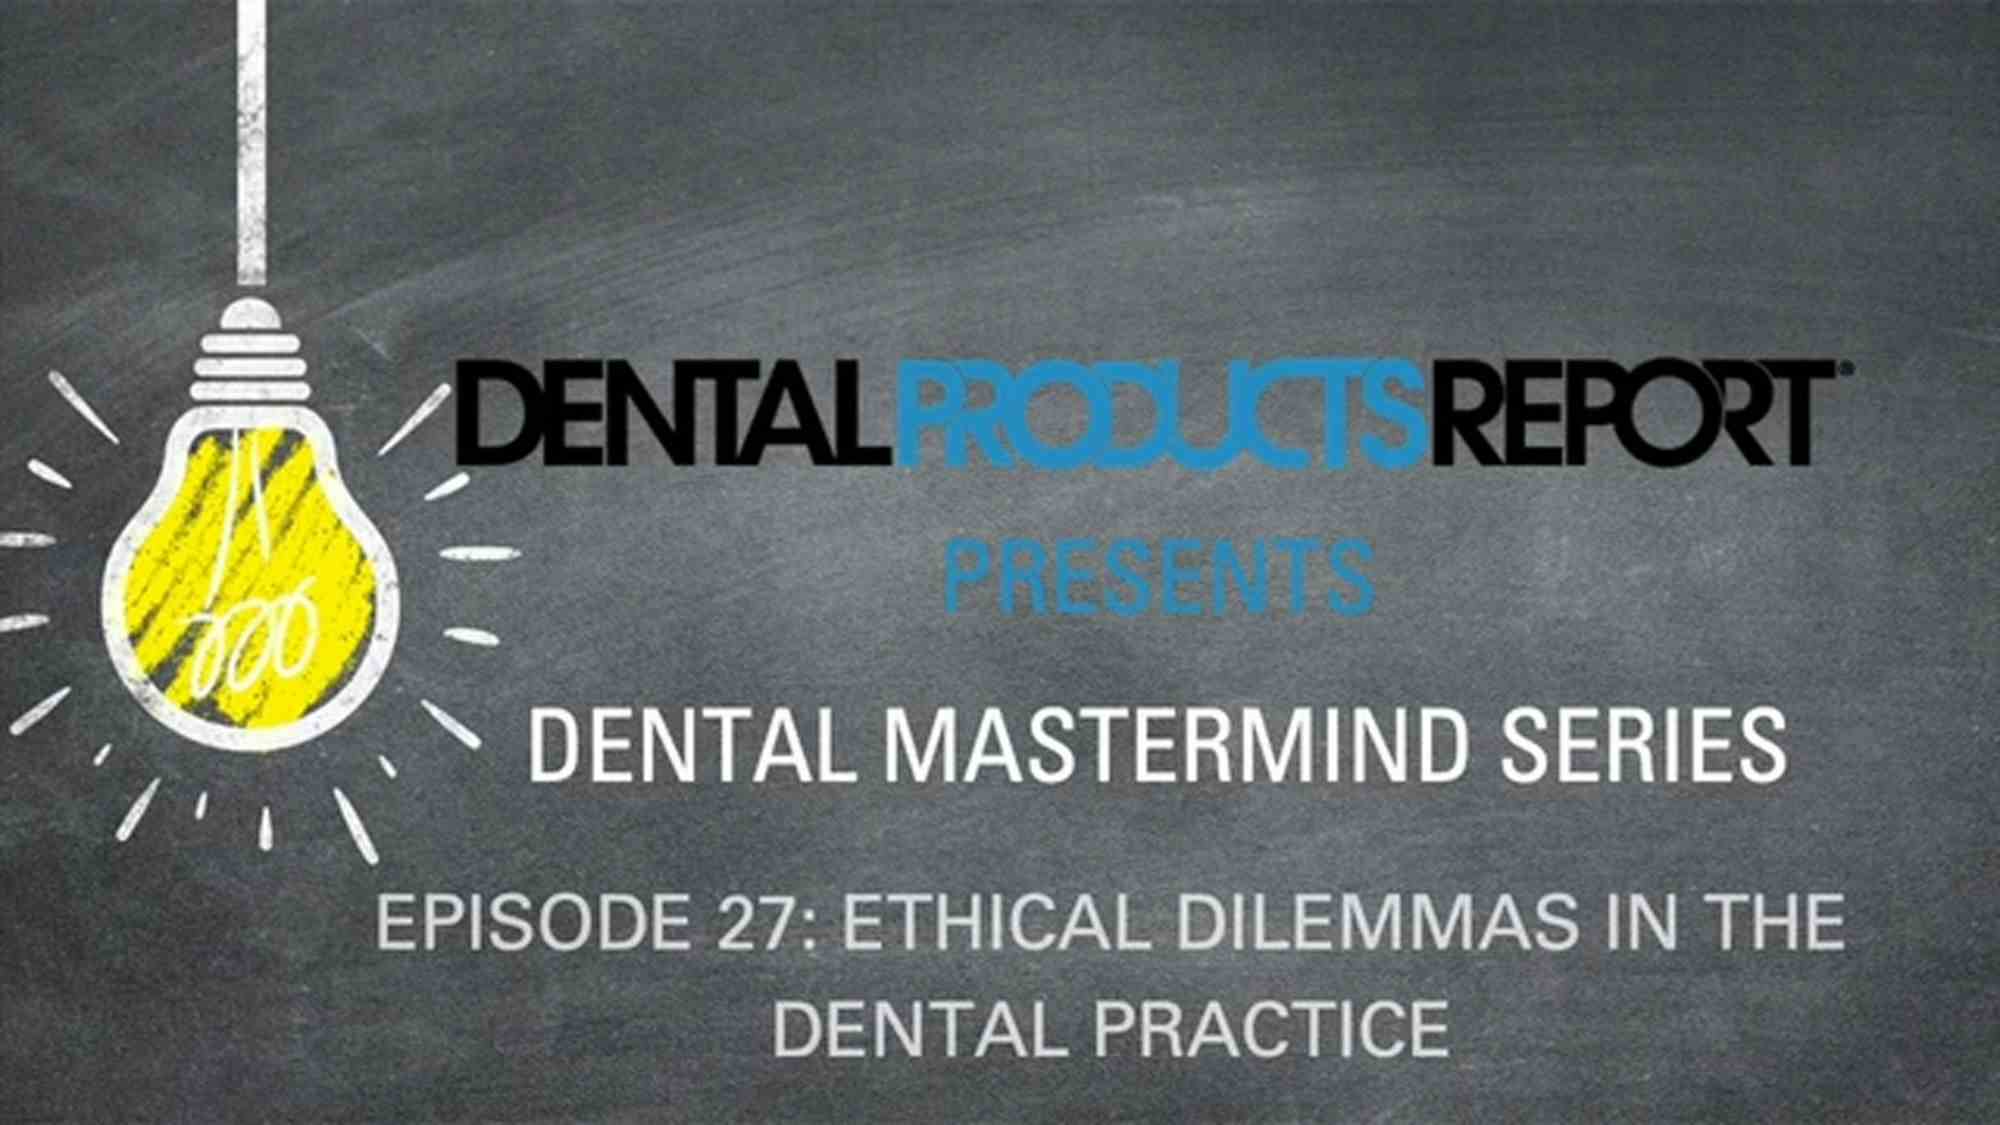 Mastermind - Episode 27 - Ethical Dilemmas in the Dental Practice